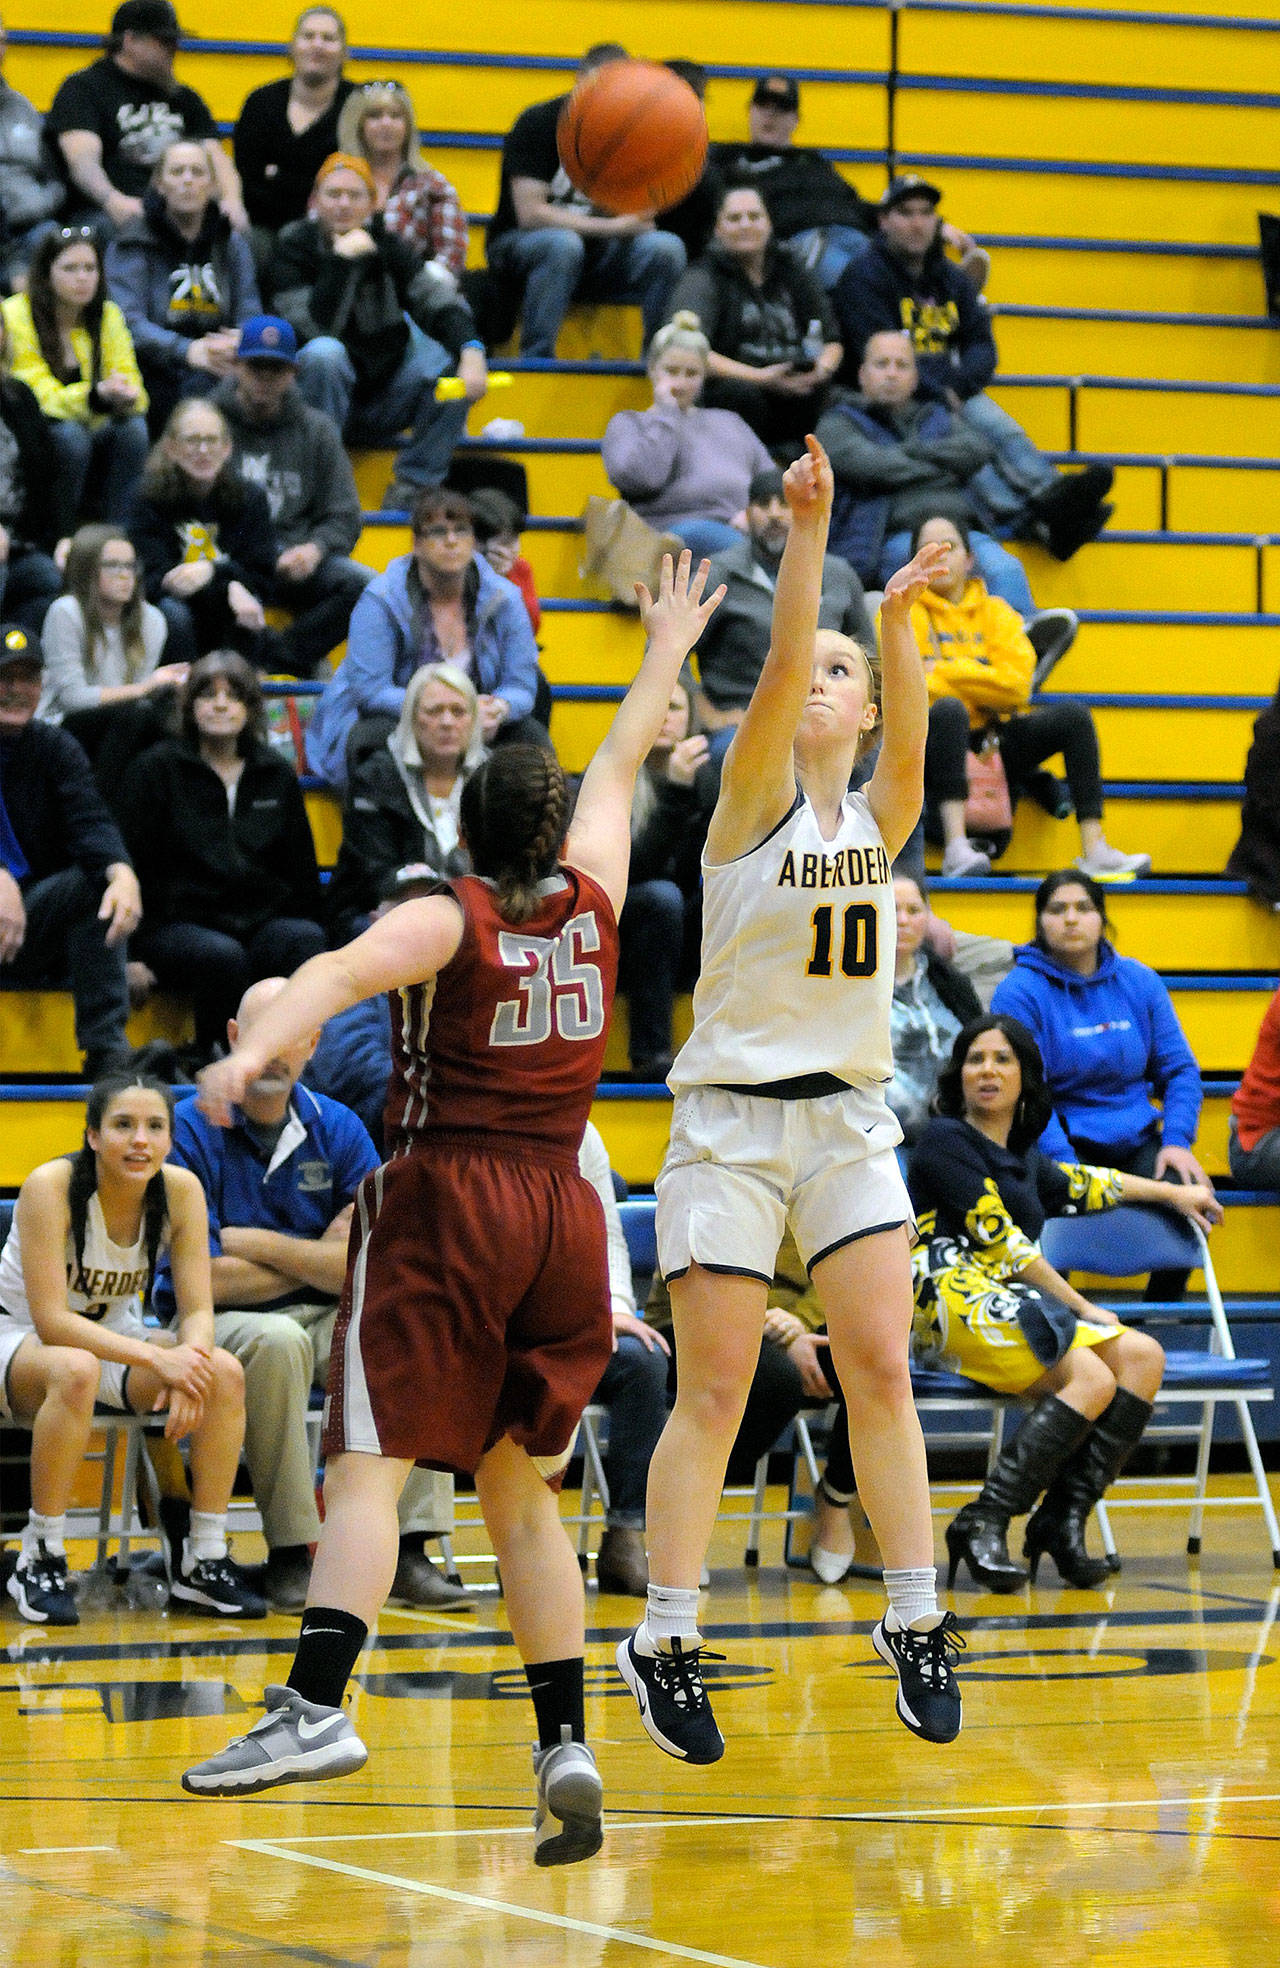 Aberdeen senior Emmy Walsh (10) puts up a shot while being defended by Hoquiam’s Taylor Strom during the Bobcats’ 54-37 victory on Wednesday at Aberdeen High School. Walsh scored 14 points in the contest. (Ryan Sparks | Grays Harbor News Group)